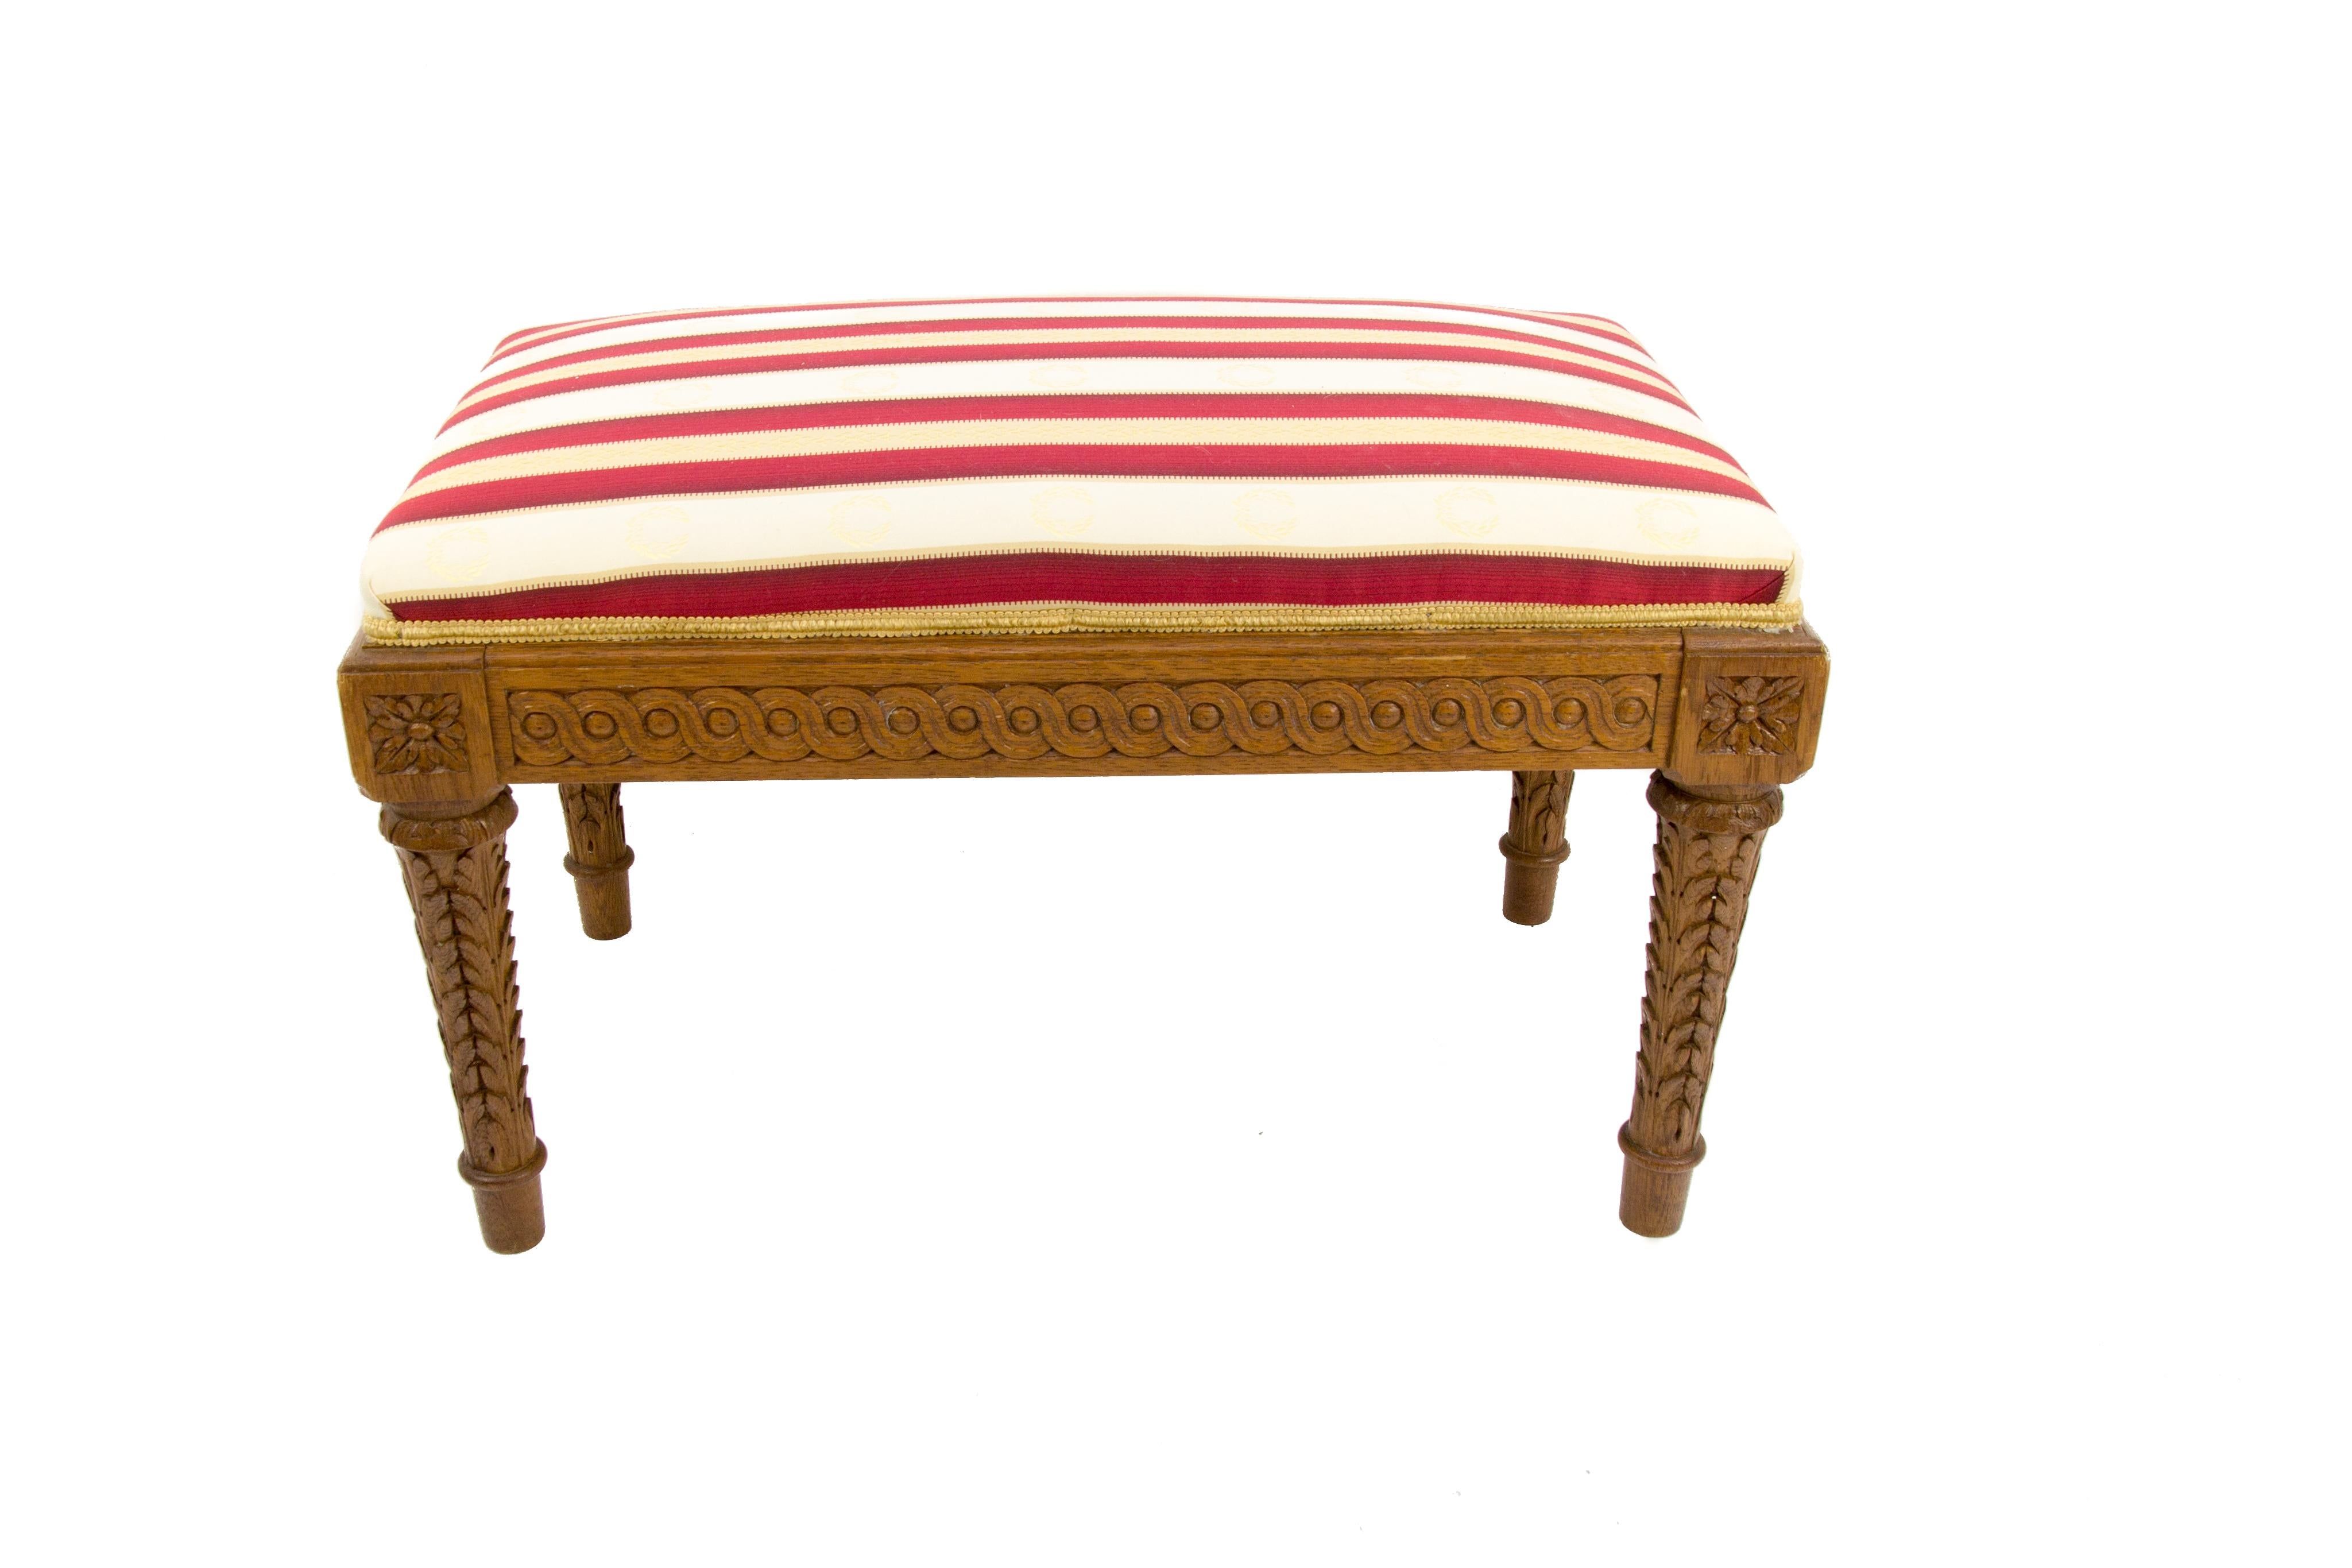 French, Louis XVI style upholstered bedroom bench, apron carved with guilloche motif with beautifully carved fluted legs headed with rosettes.
Dimensions: height: 42 cm / 16.53 in; width: 70 cm / 27.55; depth: 40 cm / 15.74 in.
In good condition,